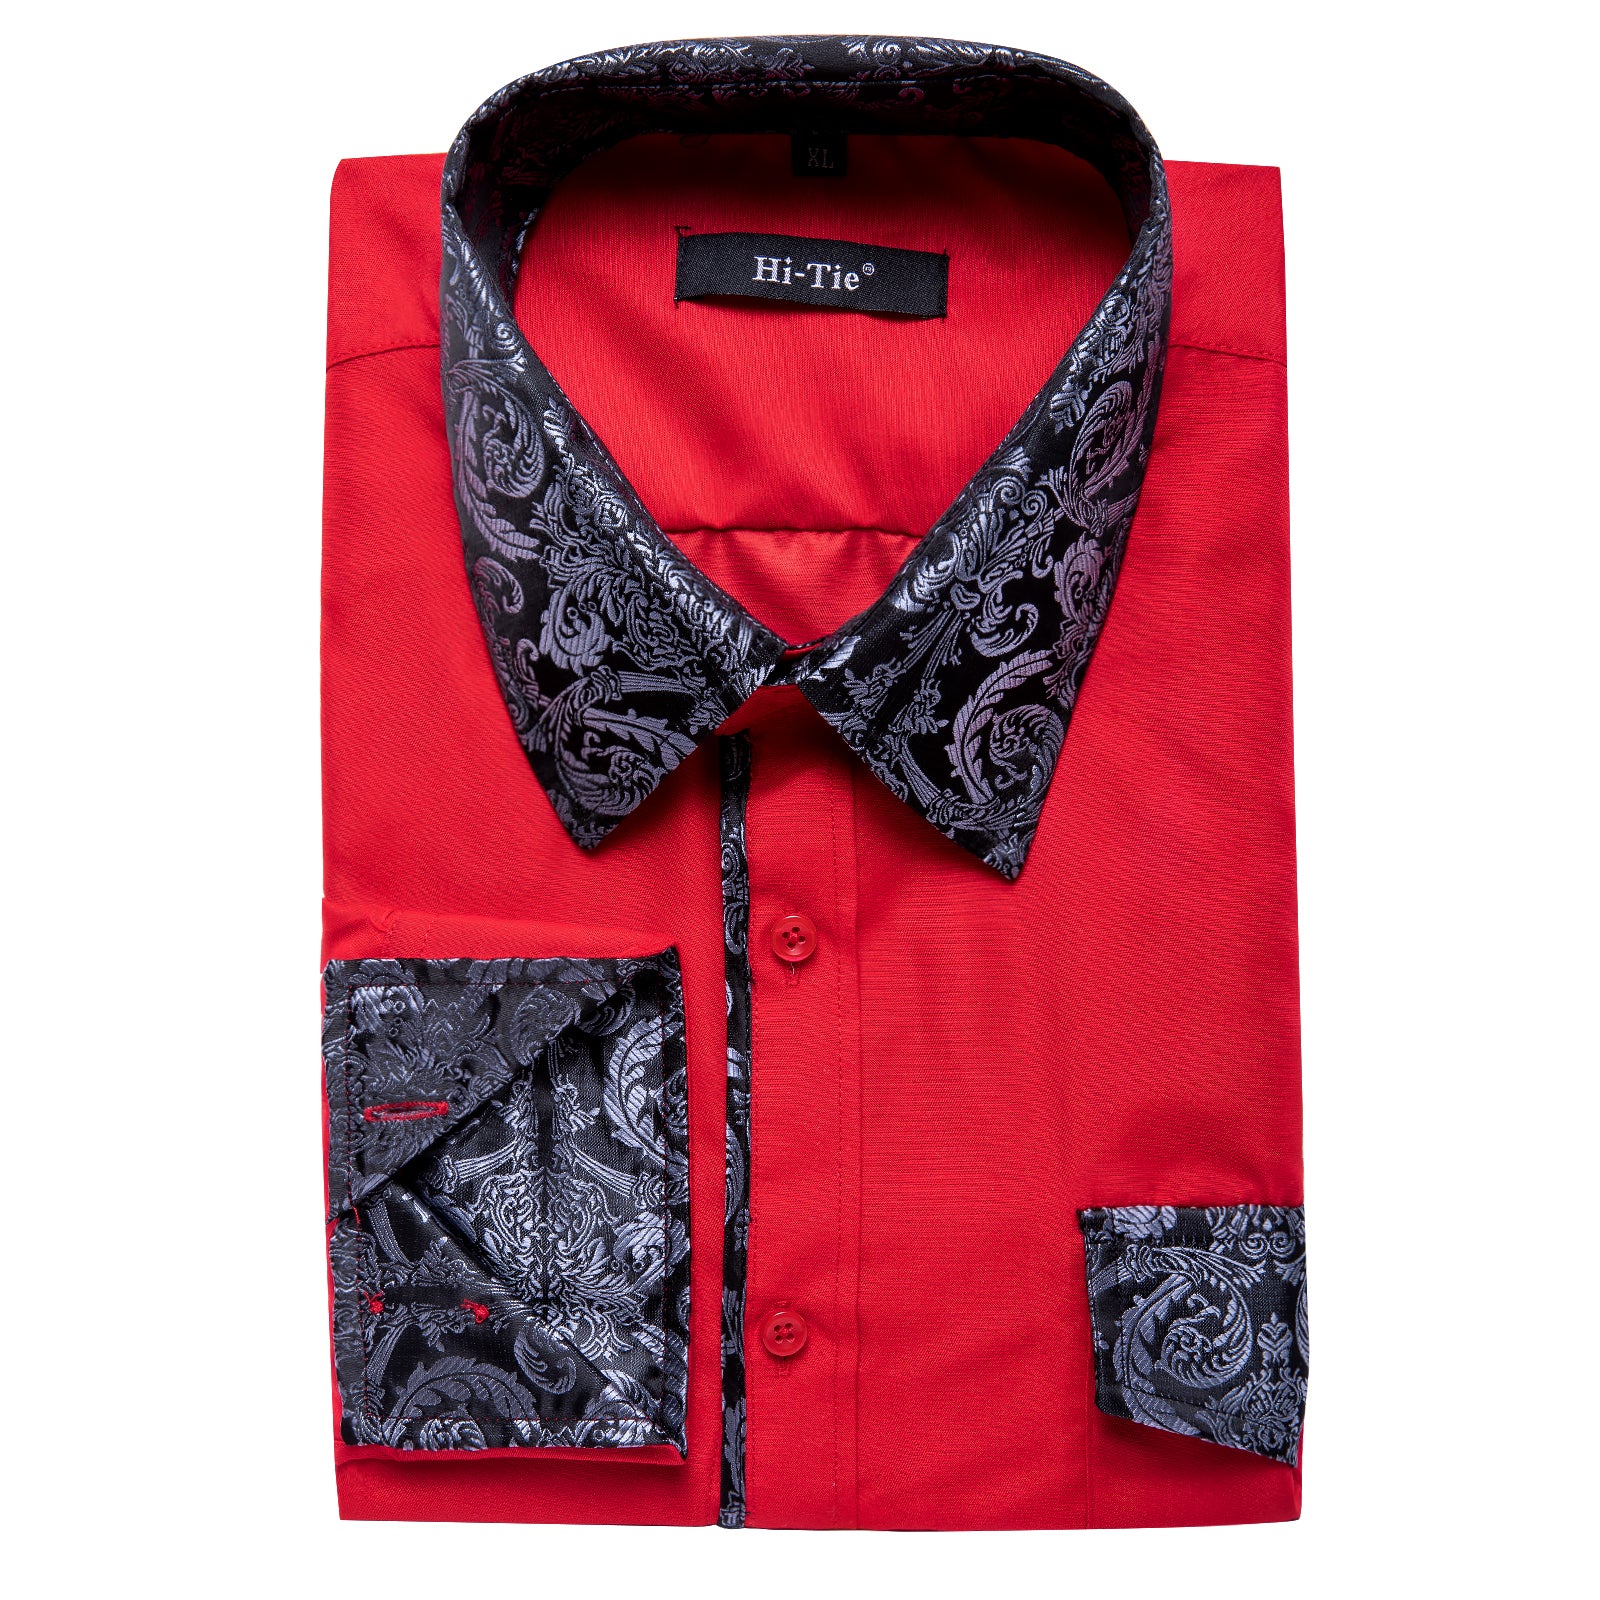 Clearance Sale Red Black Stitching Shirt